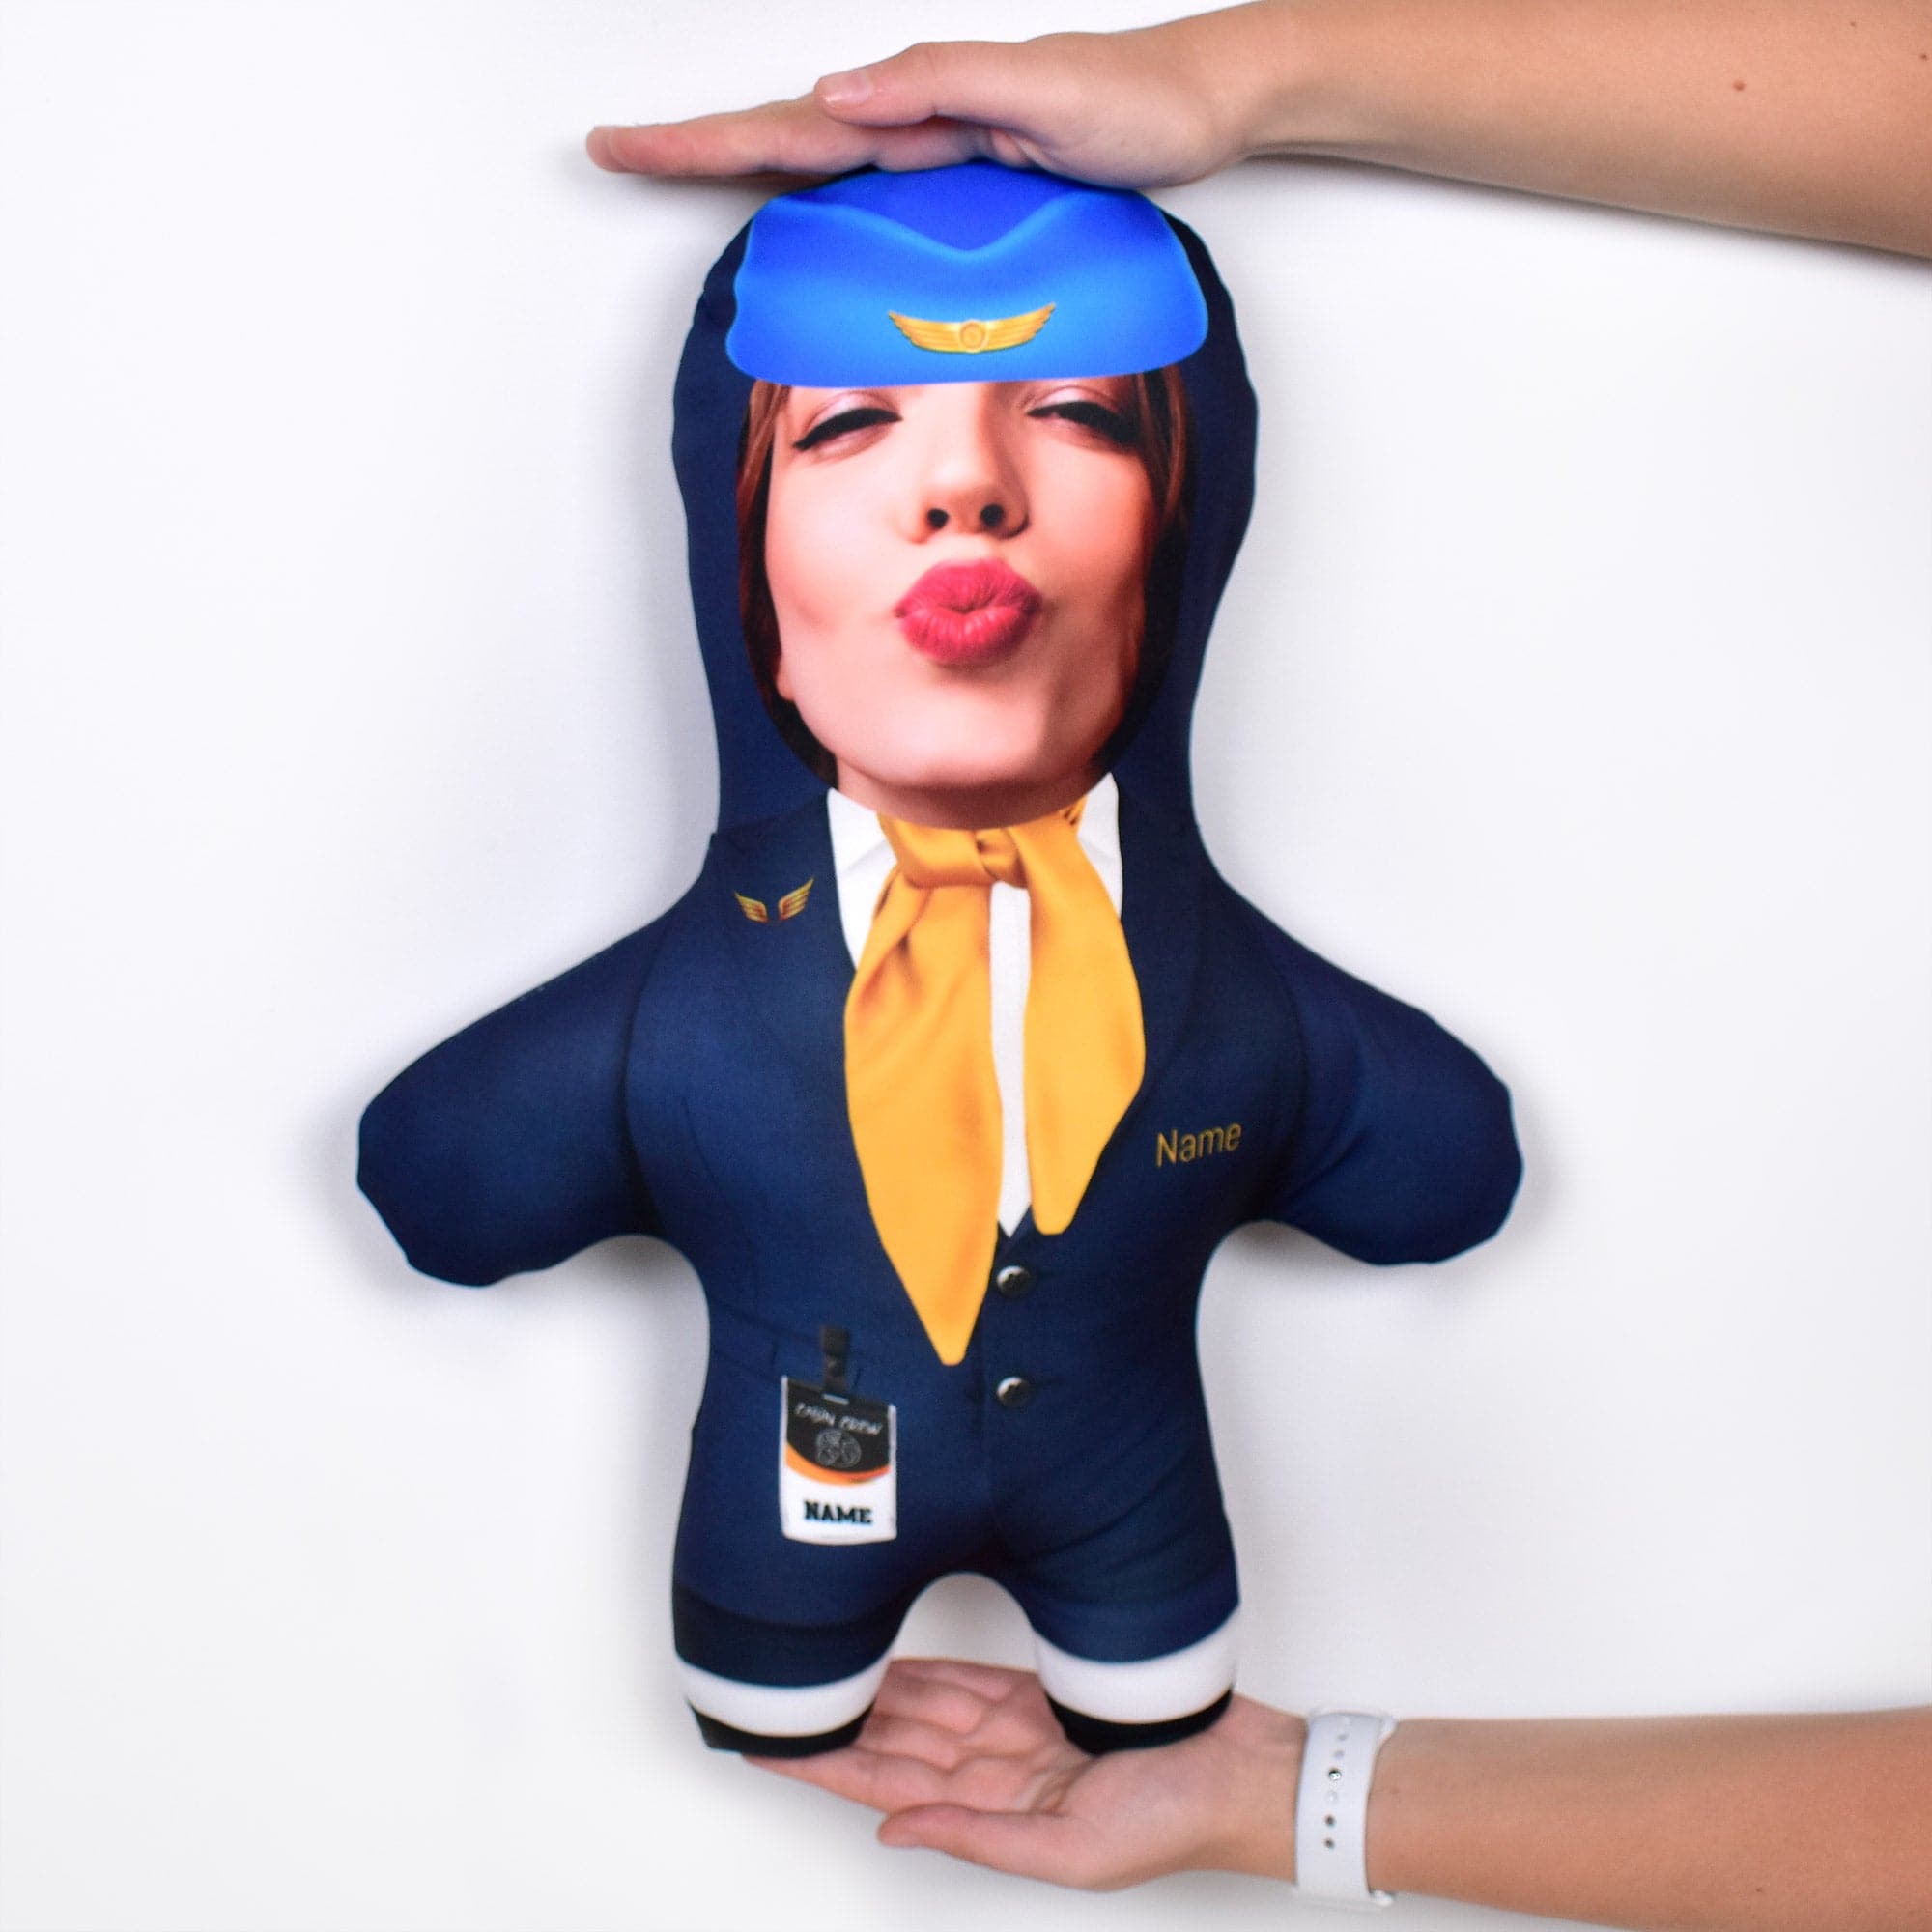 Cabin Crew - 3 Scarf Options - Personalised Mini Me Doll